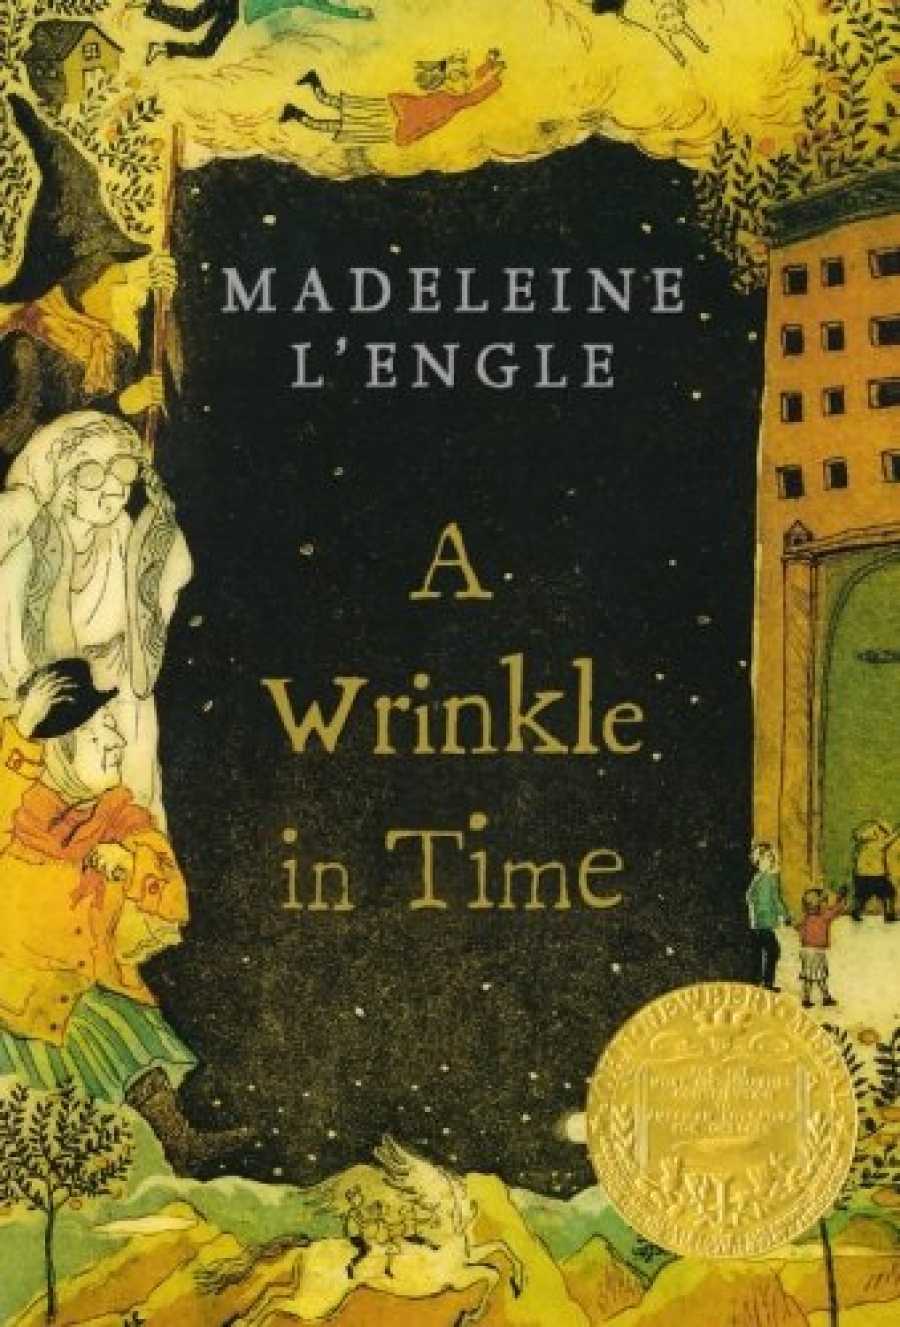 Madeleine Time Quintet 1: A Wrinkle in Time 